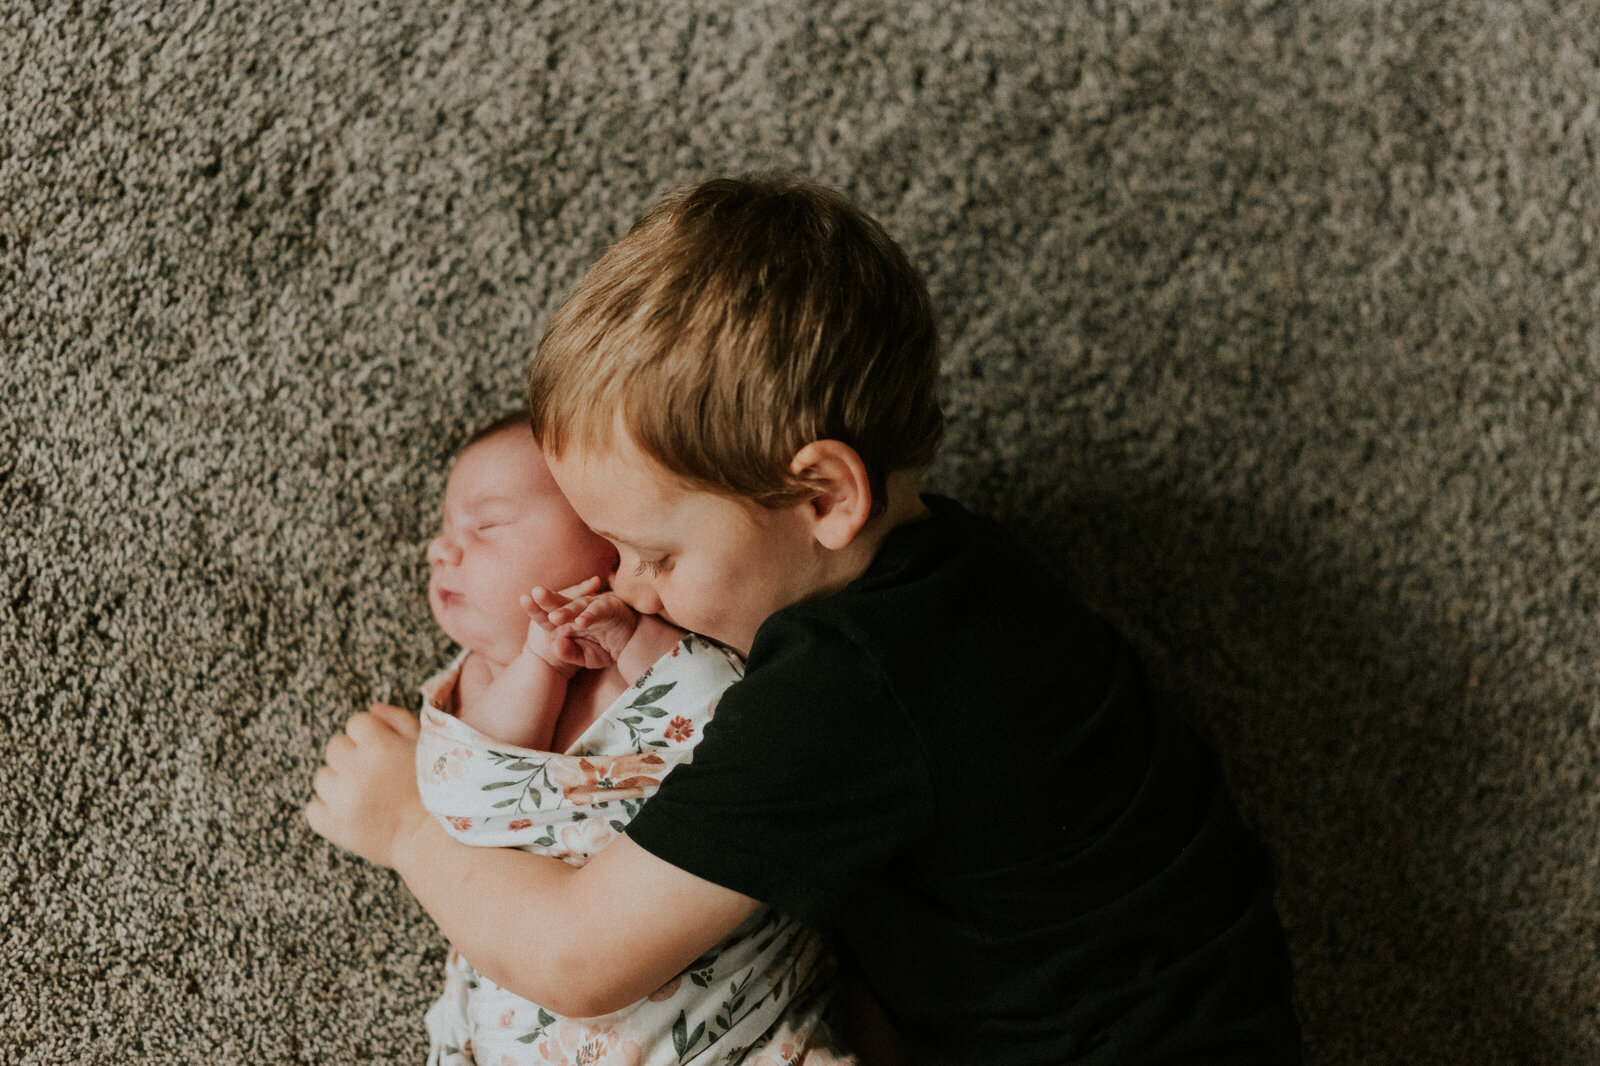 Wrap your newborn in timeless comfort in the Twin Cities. Shannon Kathleen Photography brings sessions to your St. Paul or Minneapolis home. Secure your spot for precious memories